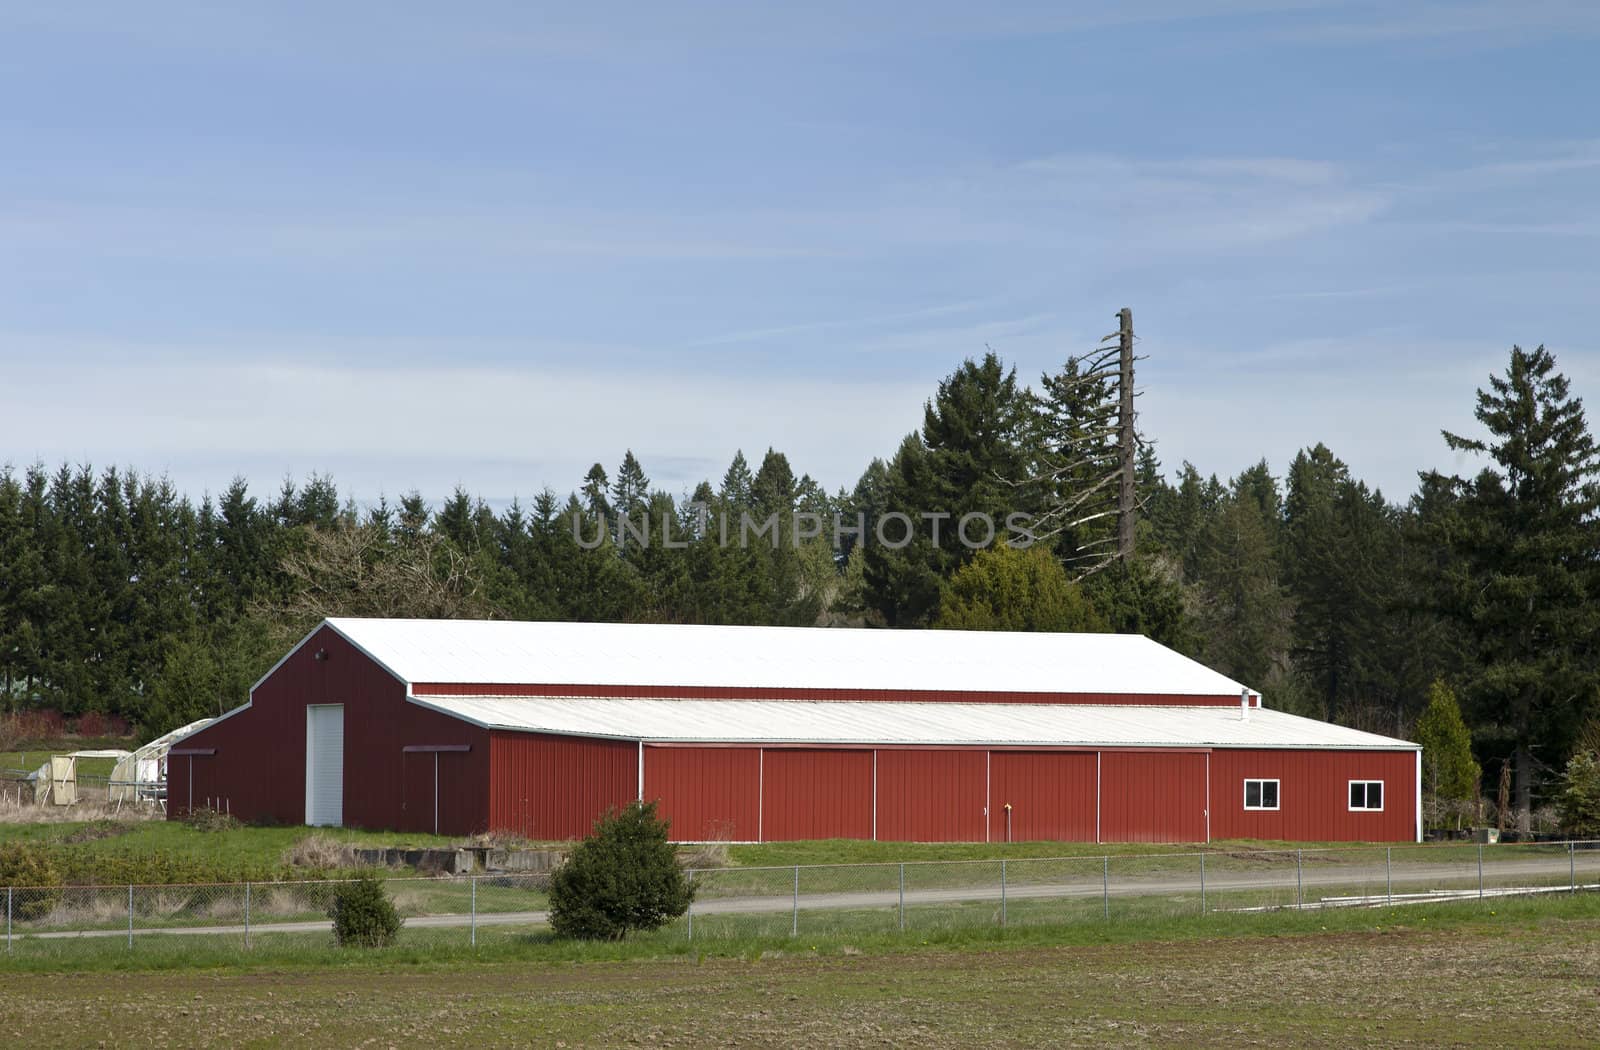 Large red warehouse rural Oregon. by Rigucci